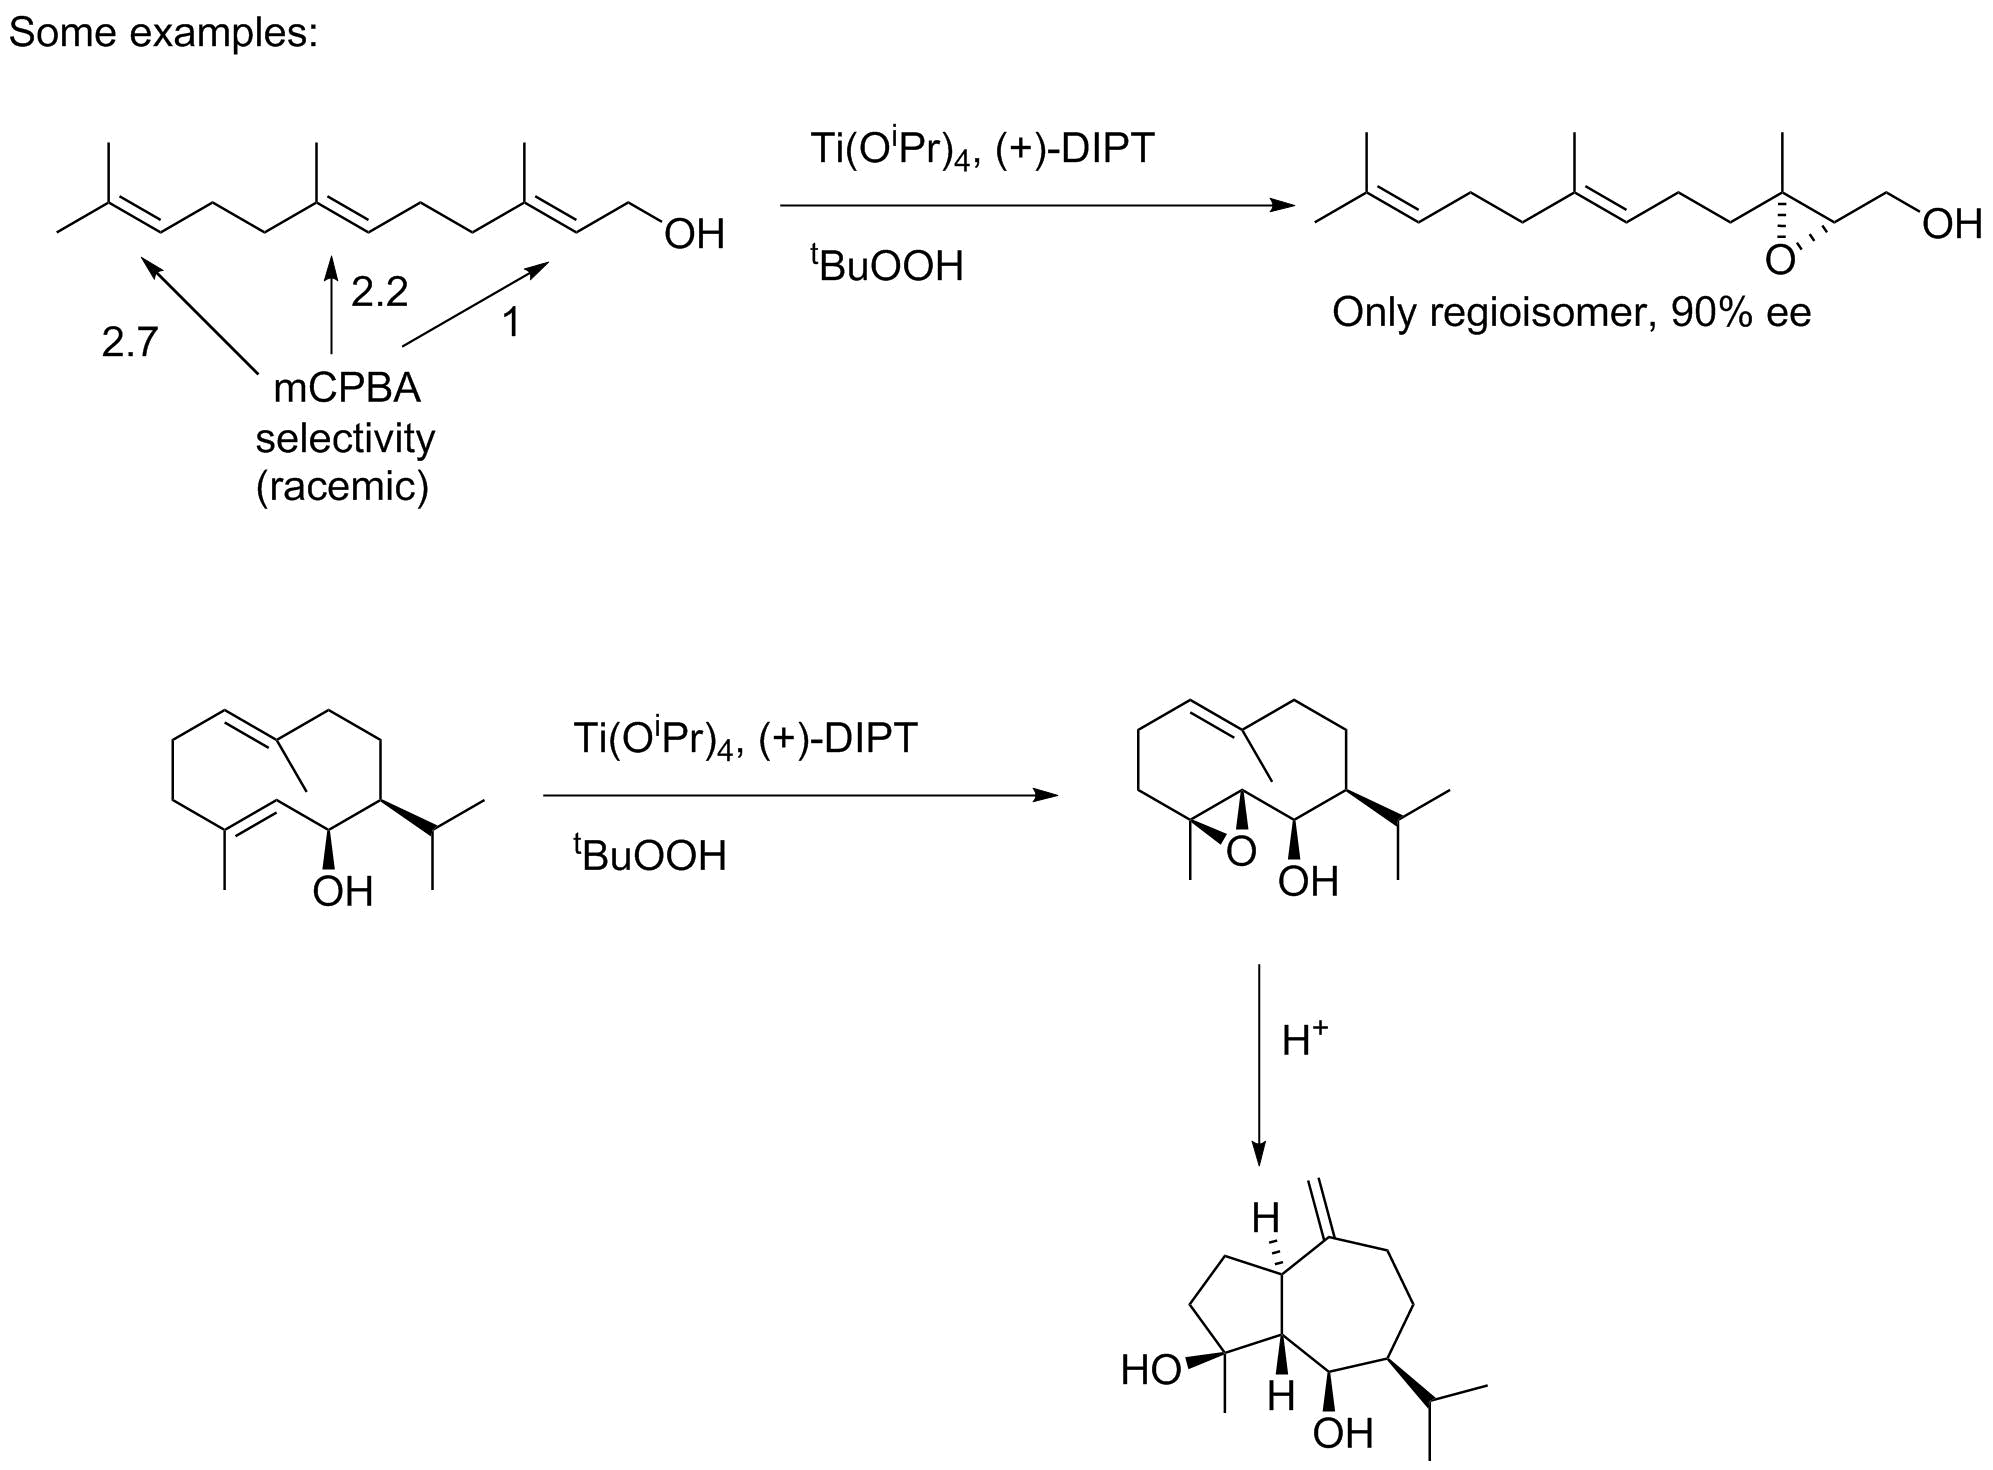 Examples: Geraniol has a 2.7:2.2:1 selectivity (no ee) with mCPBA; Sharpless epoxidation is fully selective for the allyl alcohol with 90% ee.  Another cyclic example is used to generate a natural product in two steps.